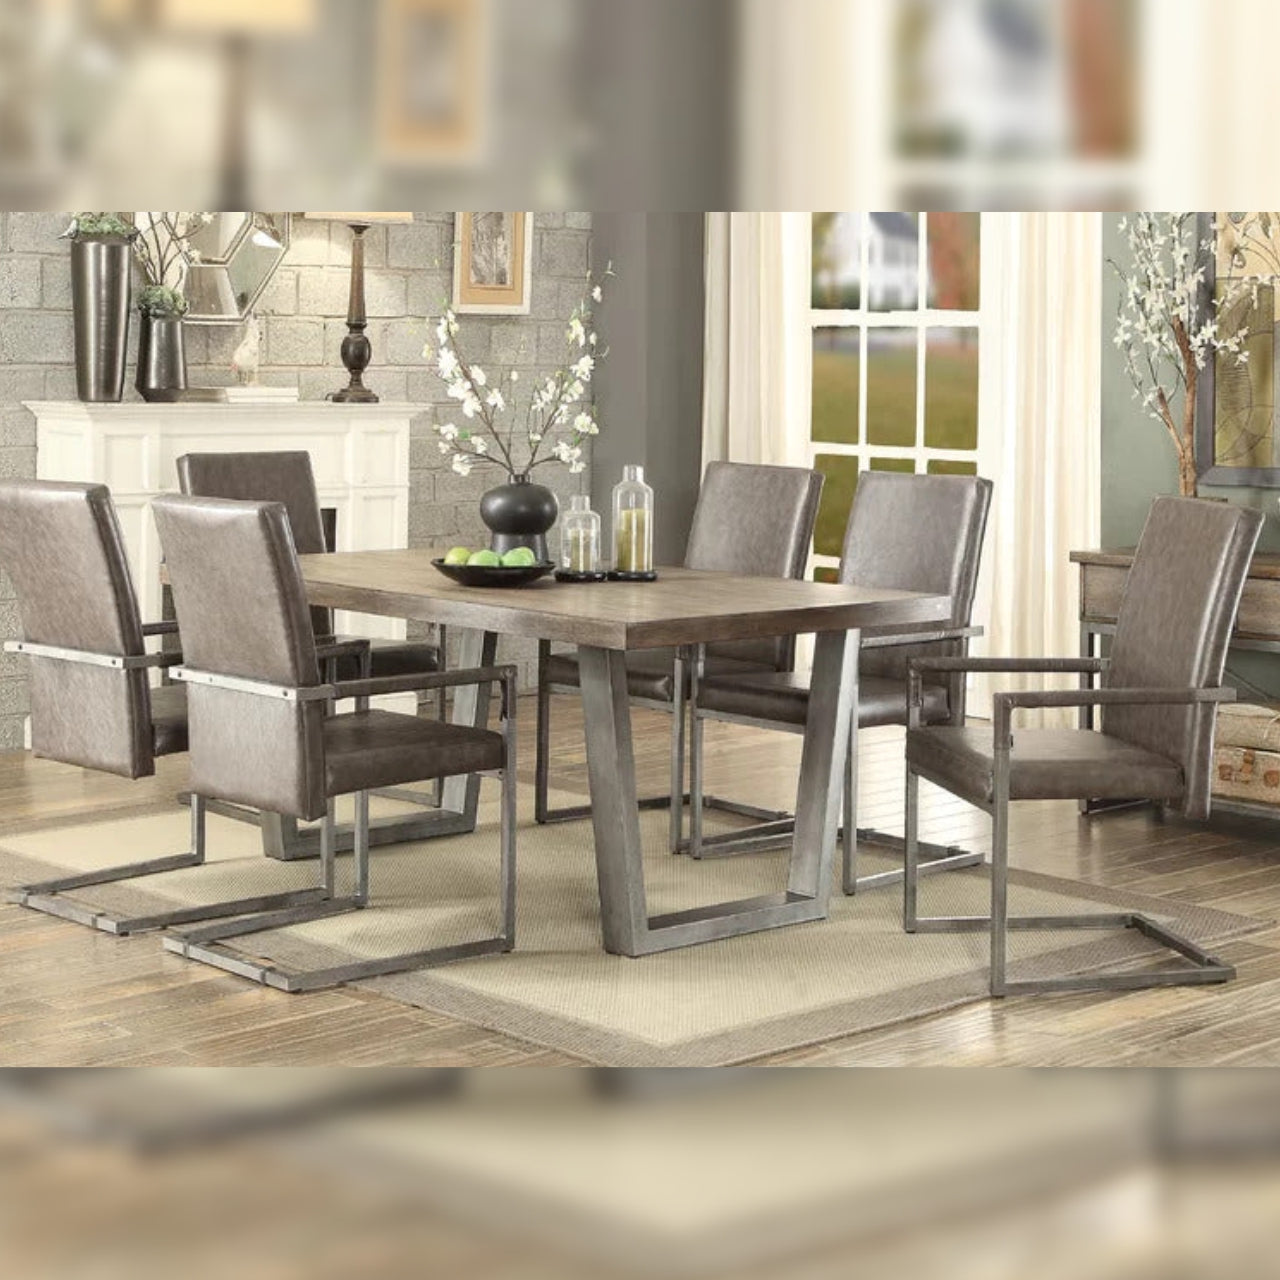 Dining Set Dining Table with 6 Chairs Dining Set